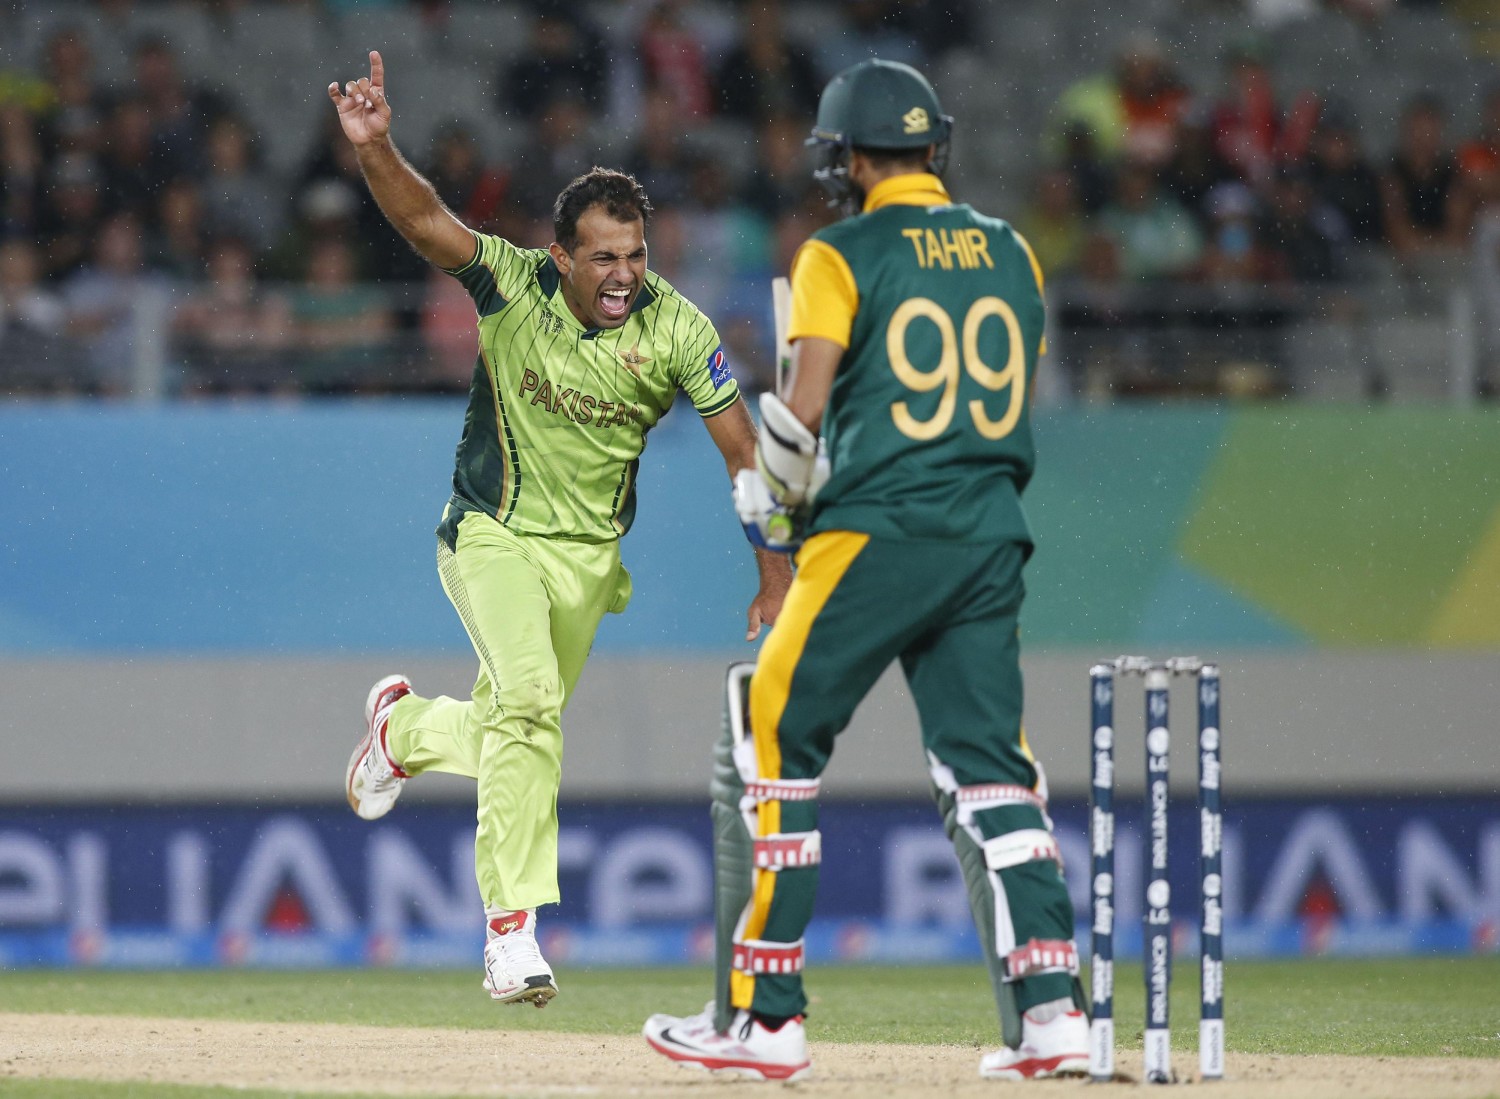 Ali, Irfan and Riaz among the wickets as South Africa are bowled out for 202 in 33.3 overs.